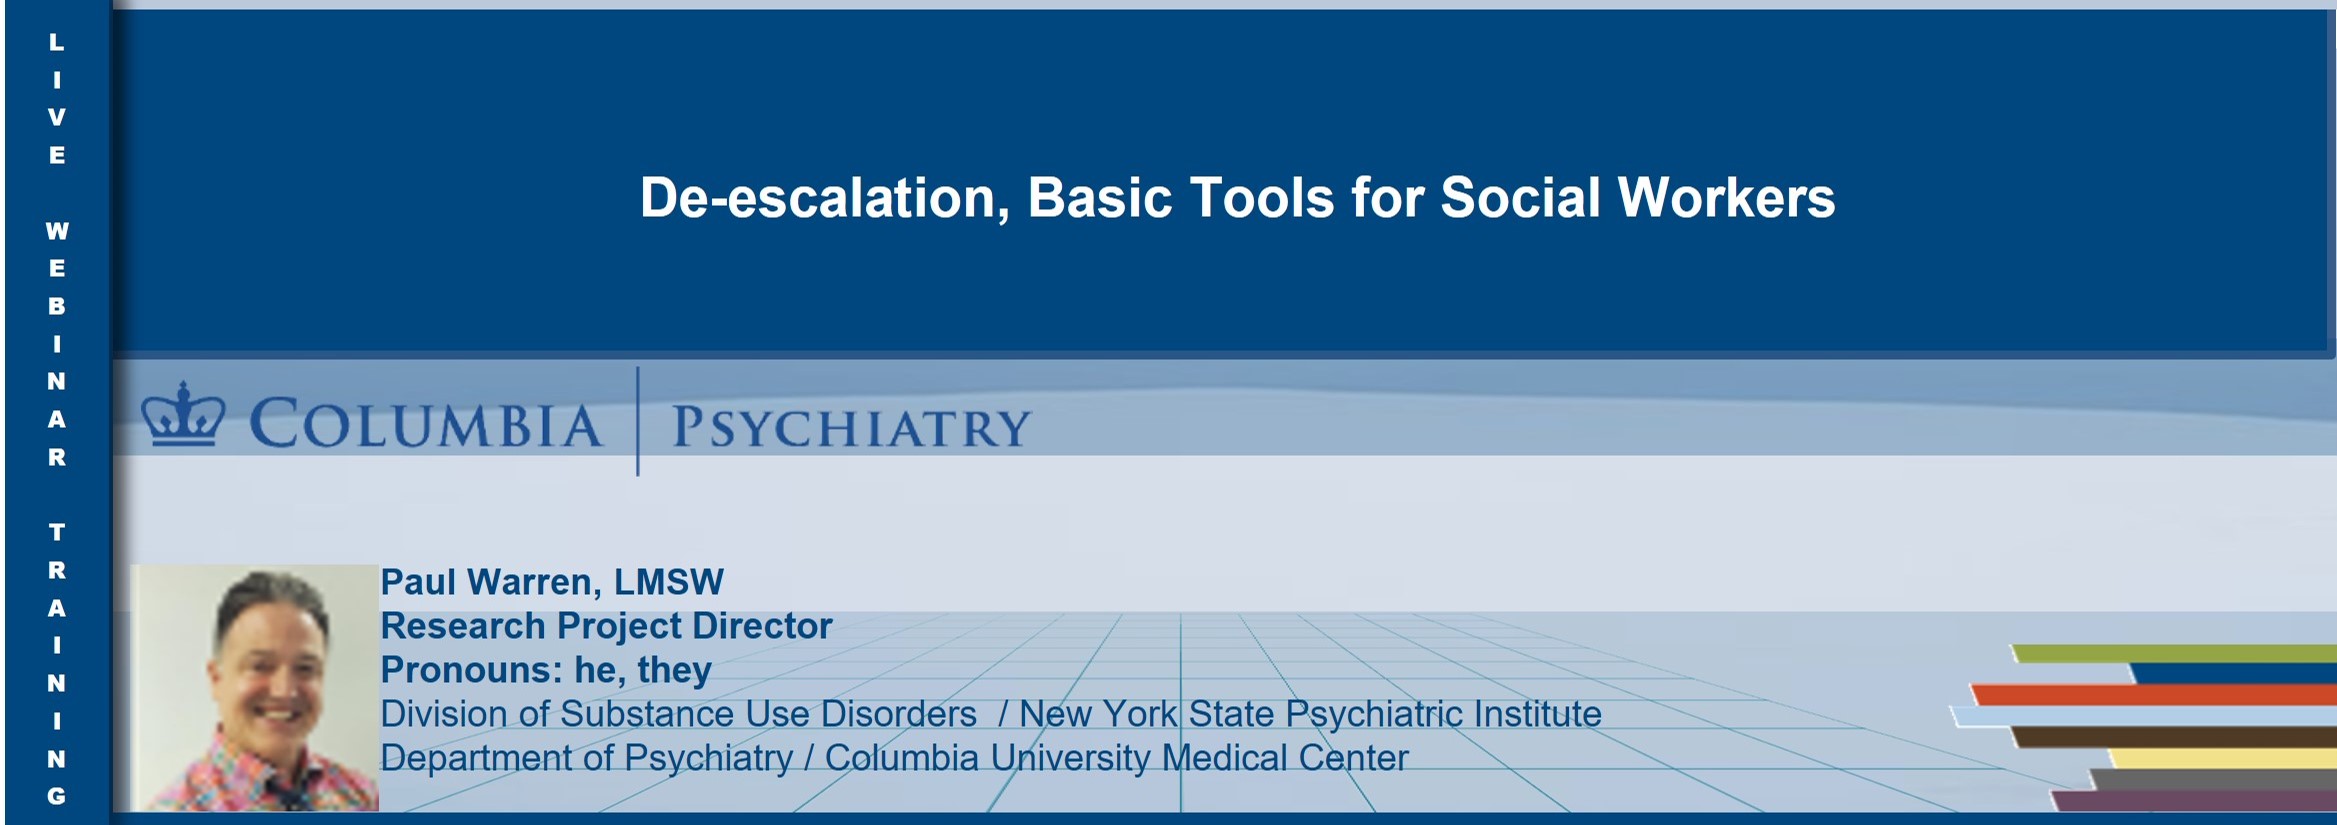 De-escalation, Basic Tools for Social Workers